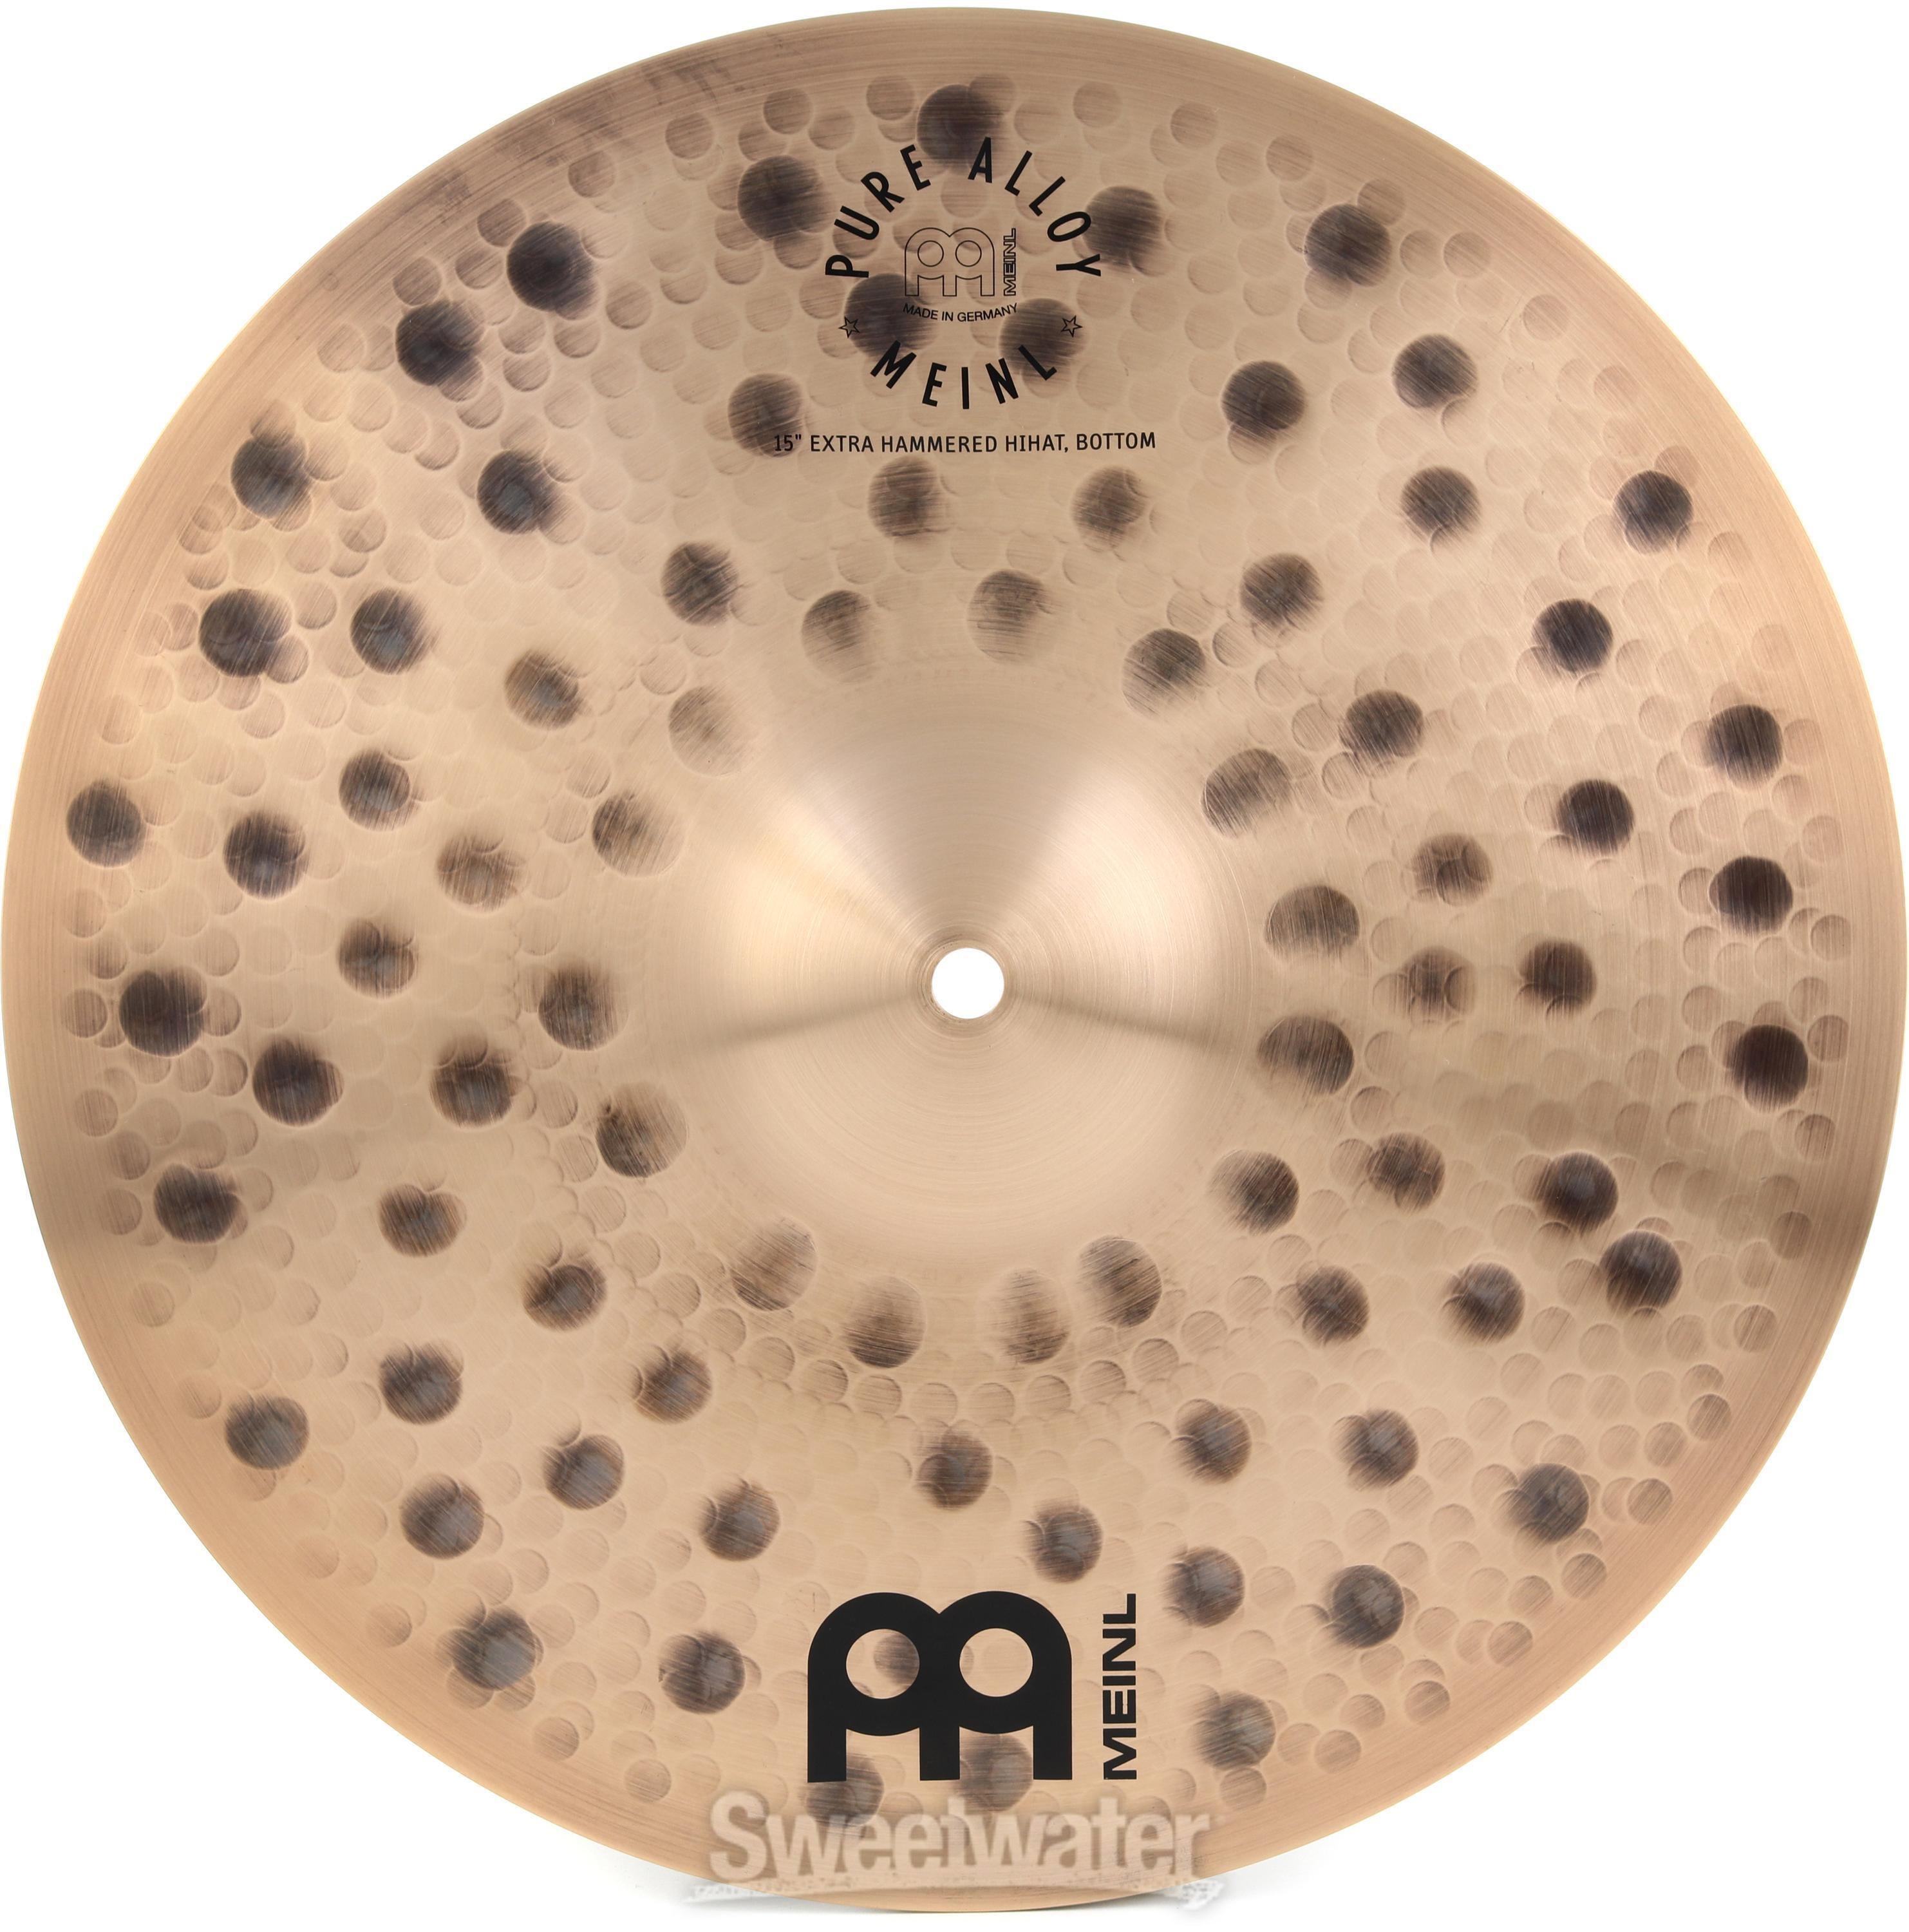 Meinl Cymbals Pure Alloy Hi-hat Cymbals - 15-inch, Extra Hammered